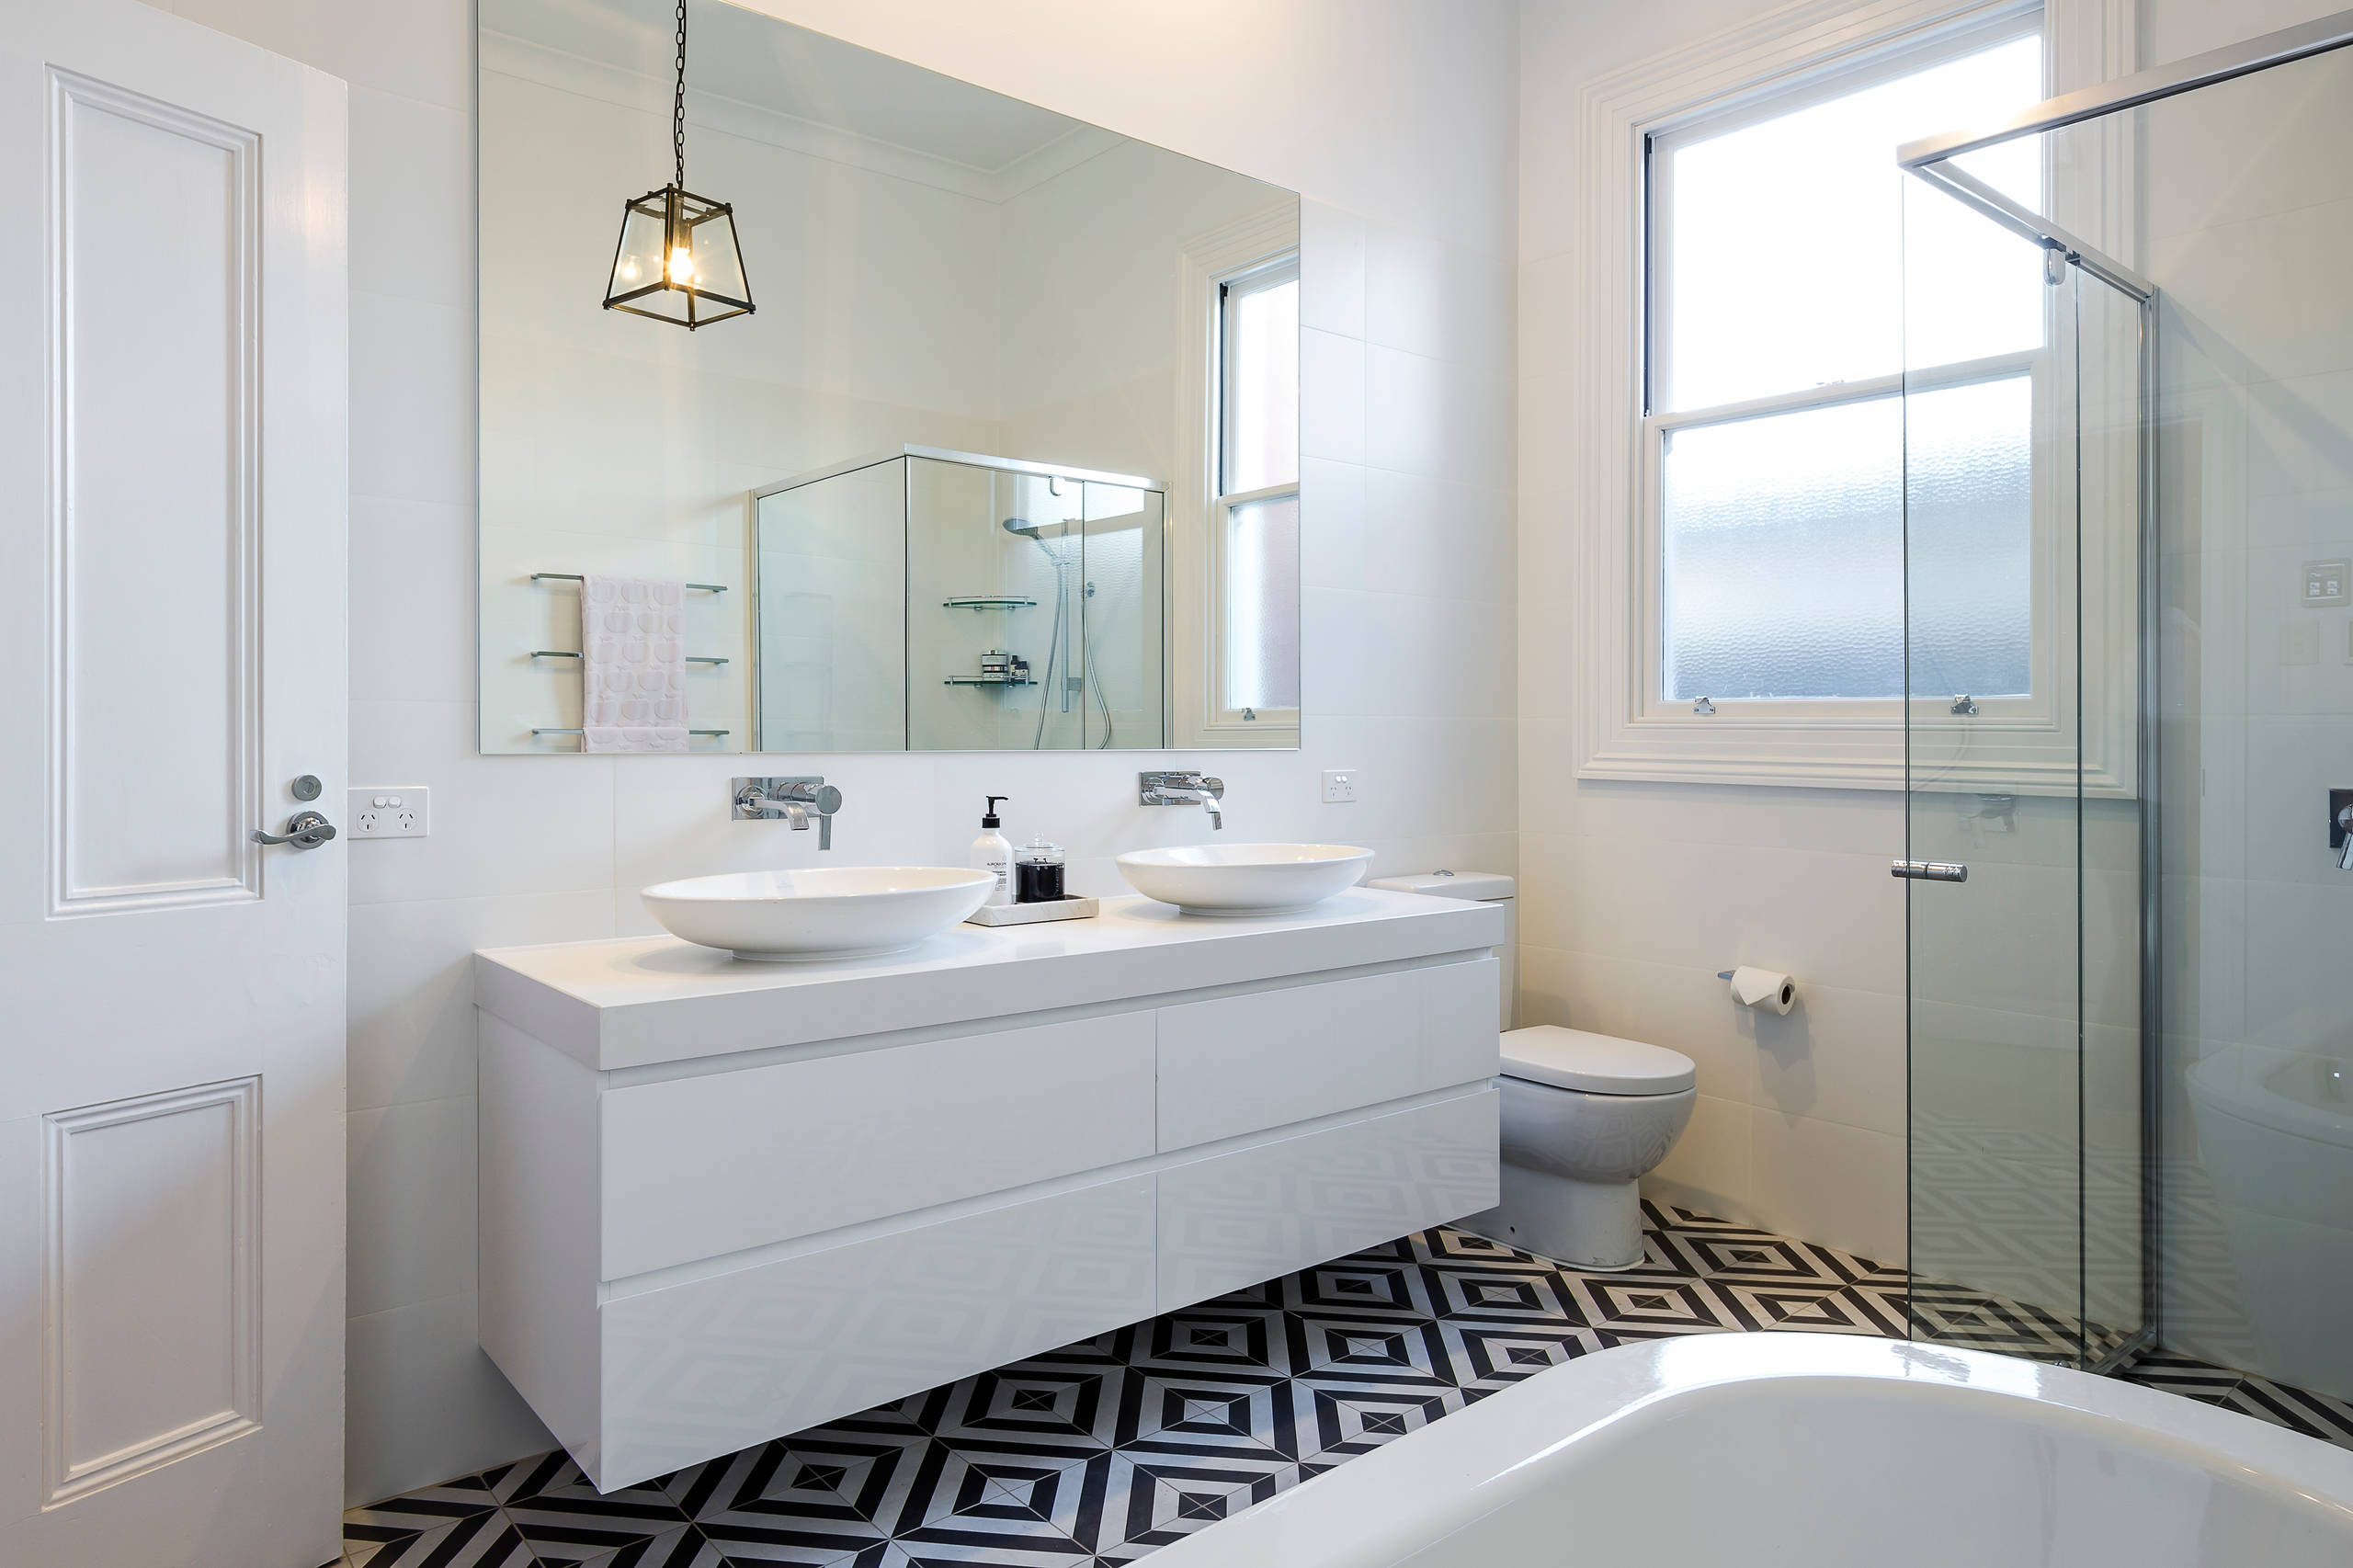 How To Choose A Bathroom Mirror Houzz Uk, What Size Mirror For 31 Vanity